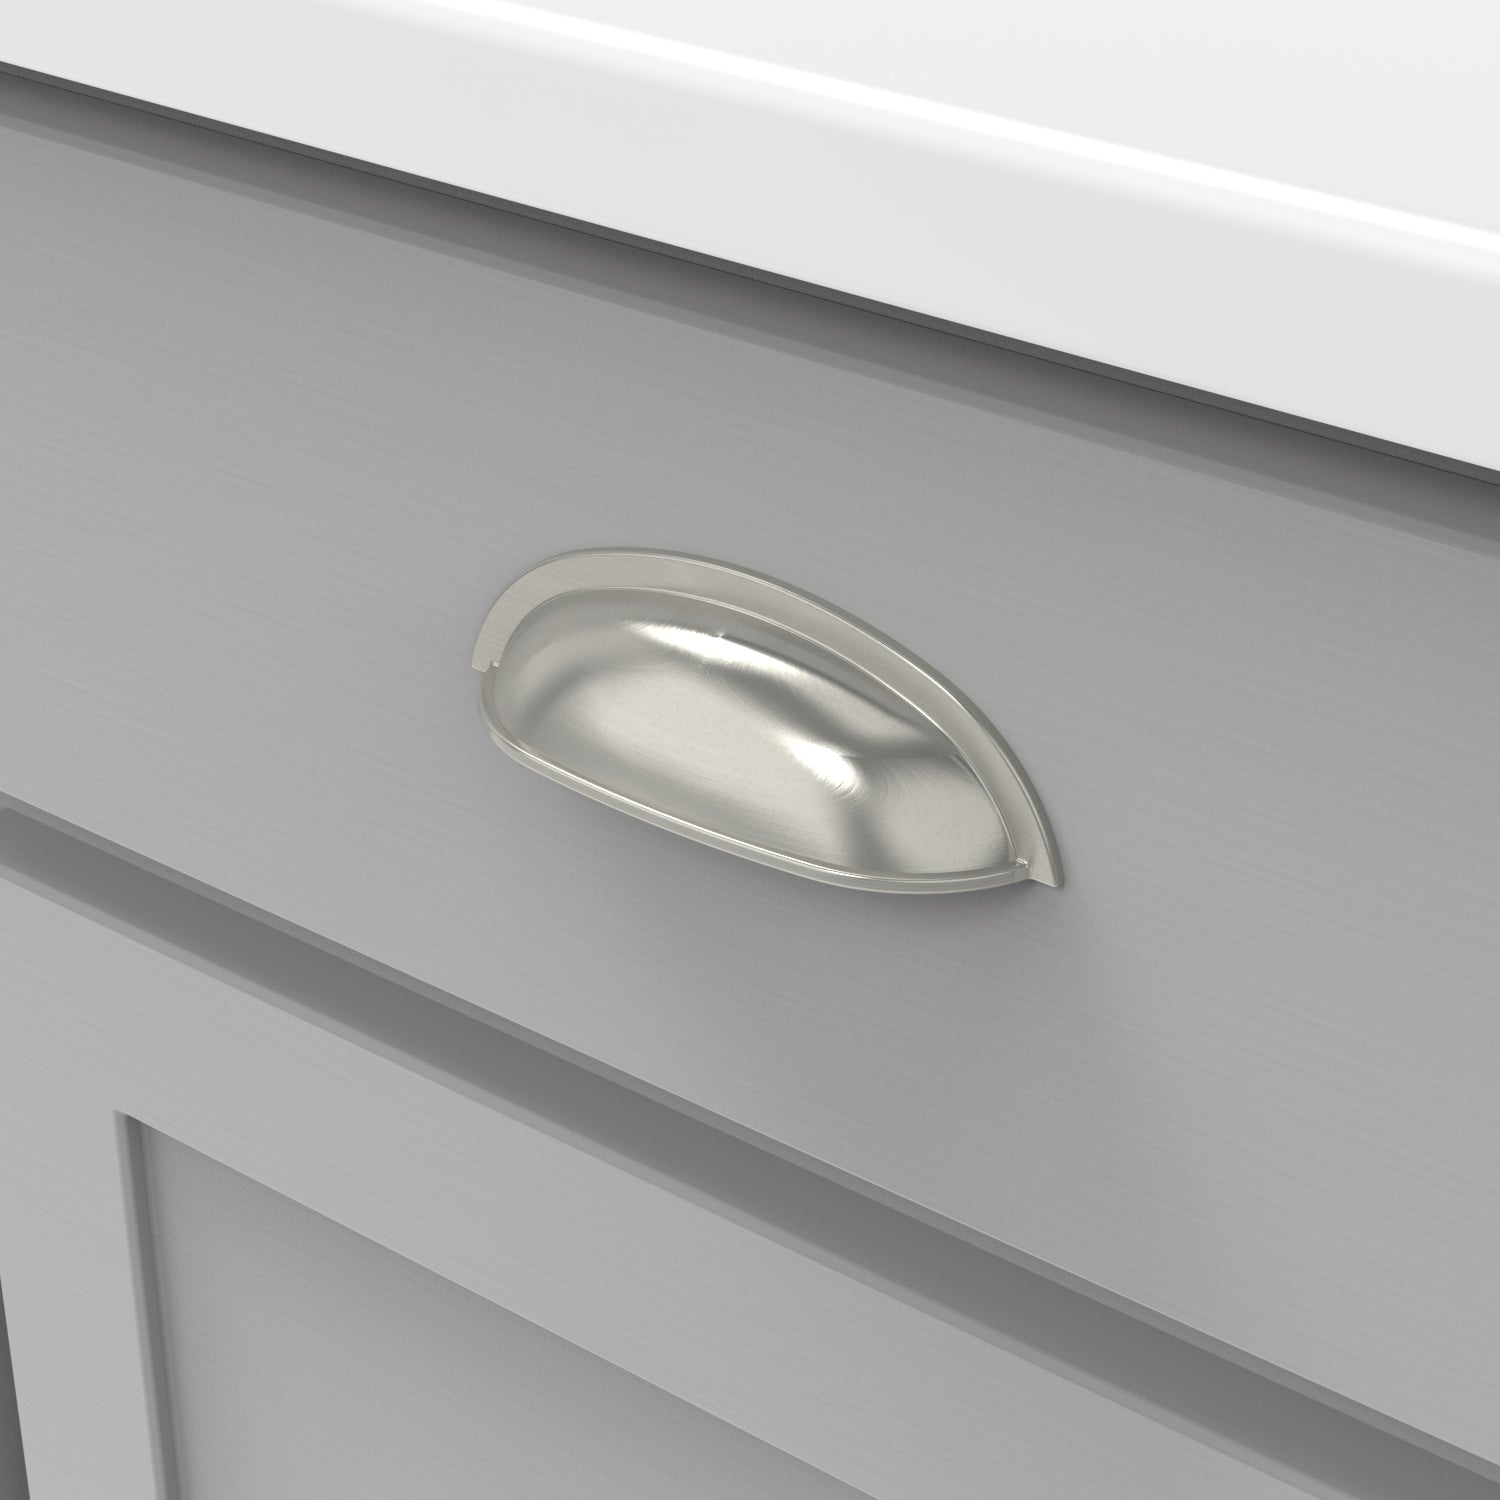 Hickory Hardware P3380-SN 128mm Cottage Satin Nickel Cabinet Pull